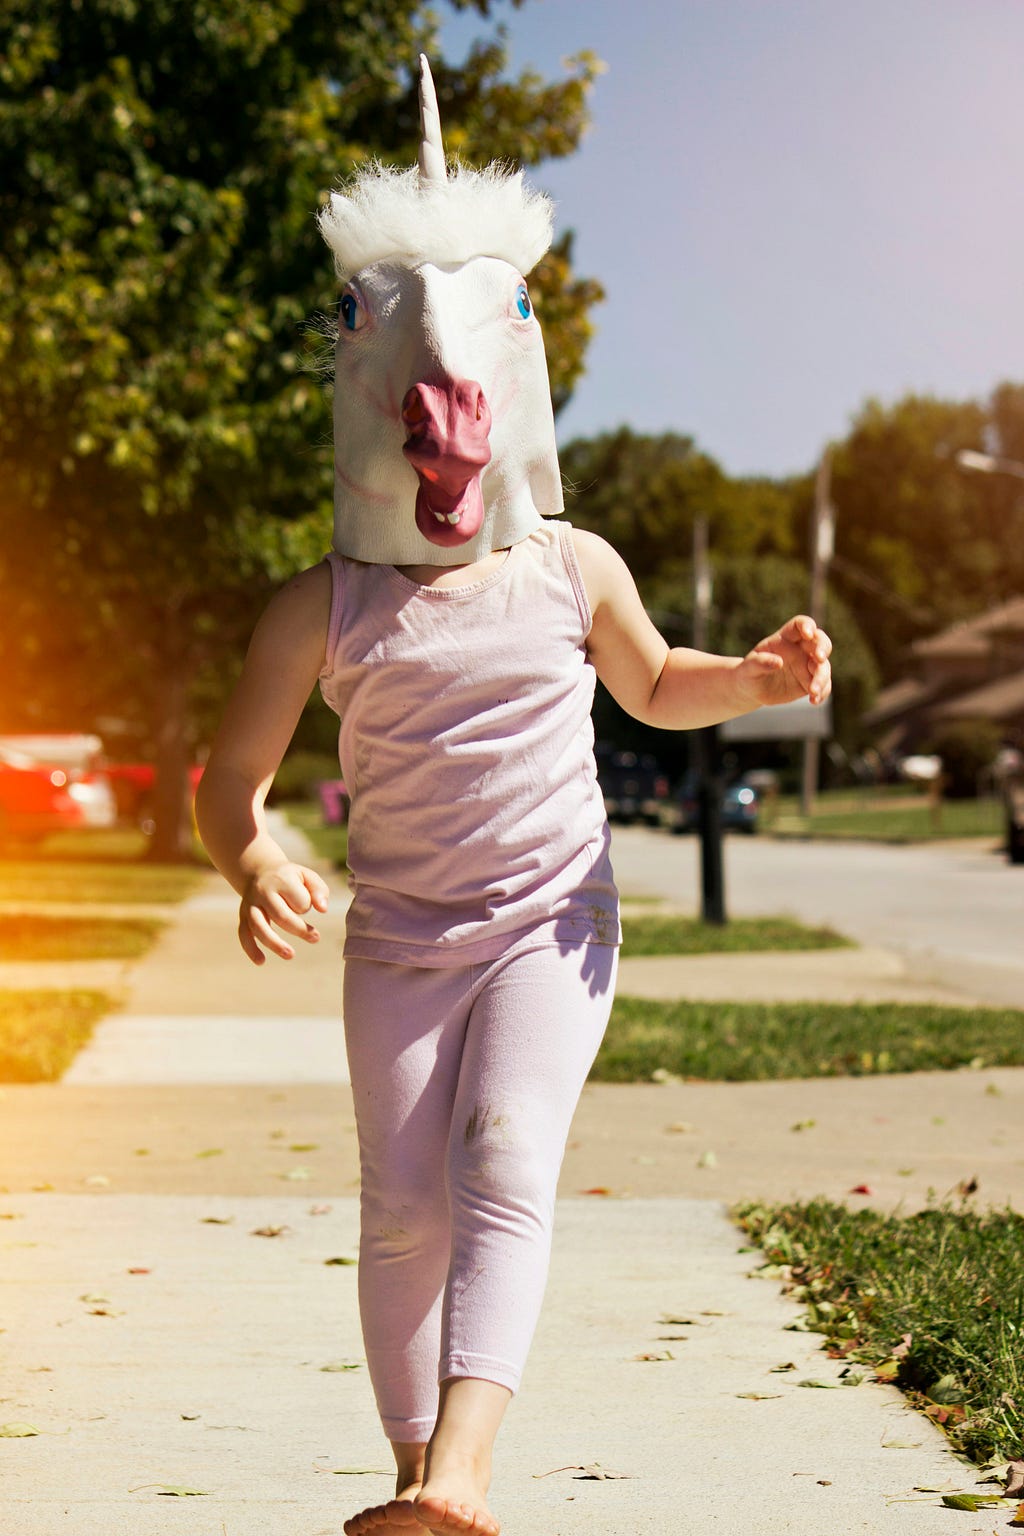 A person walking down the street with a big unicorn mask